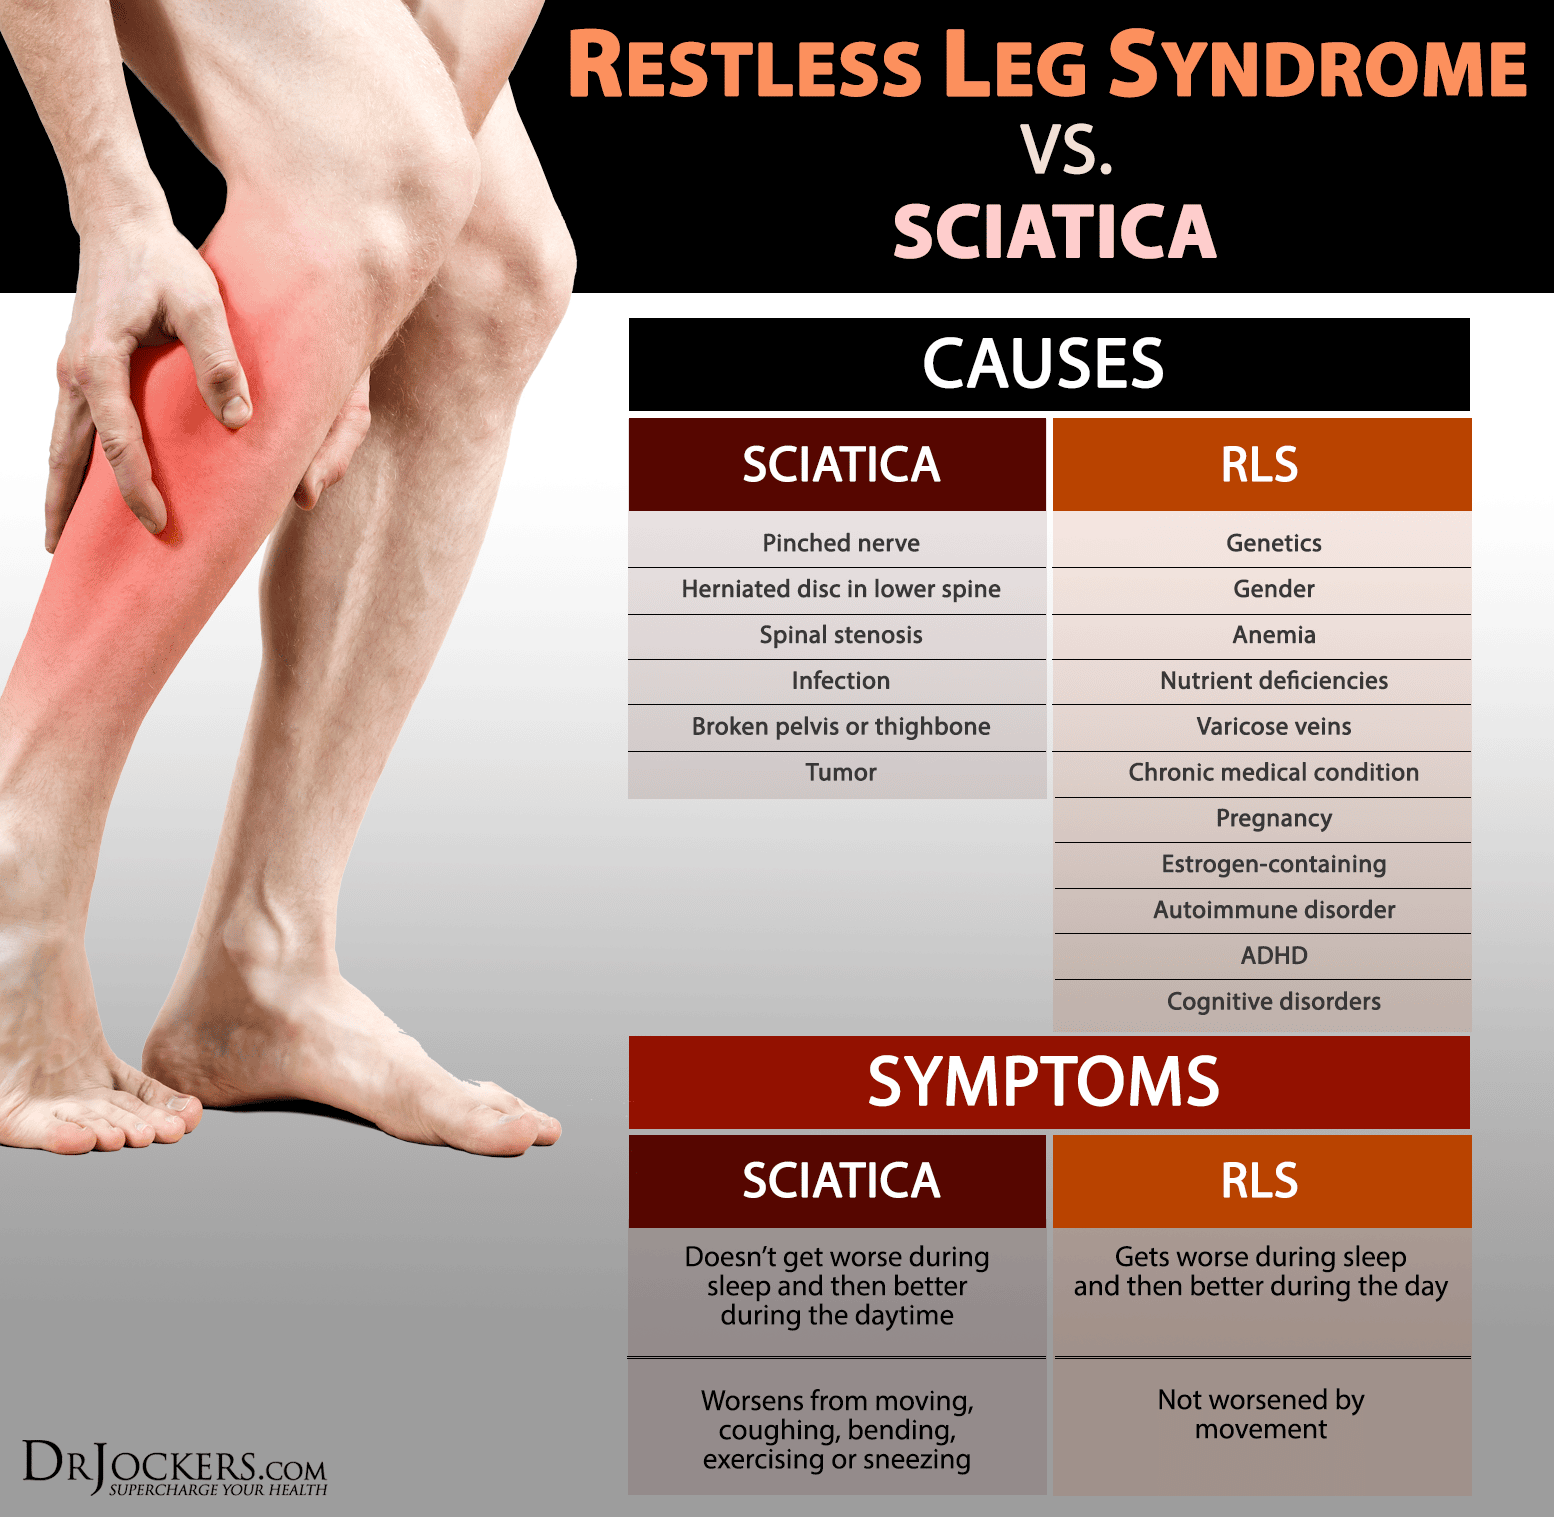 7 Steps to Overcome Restless Leg Syndrome